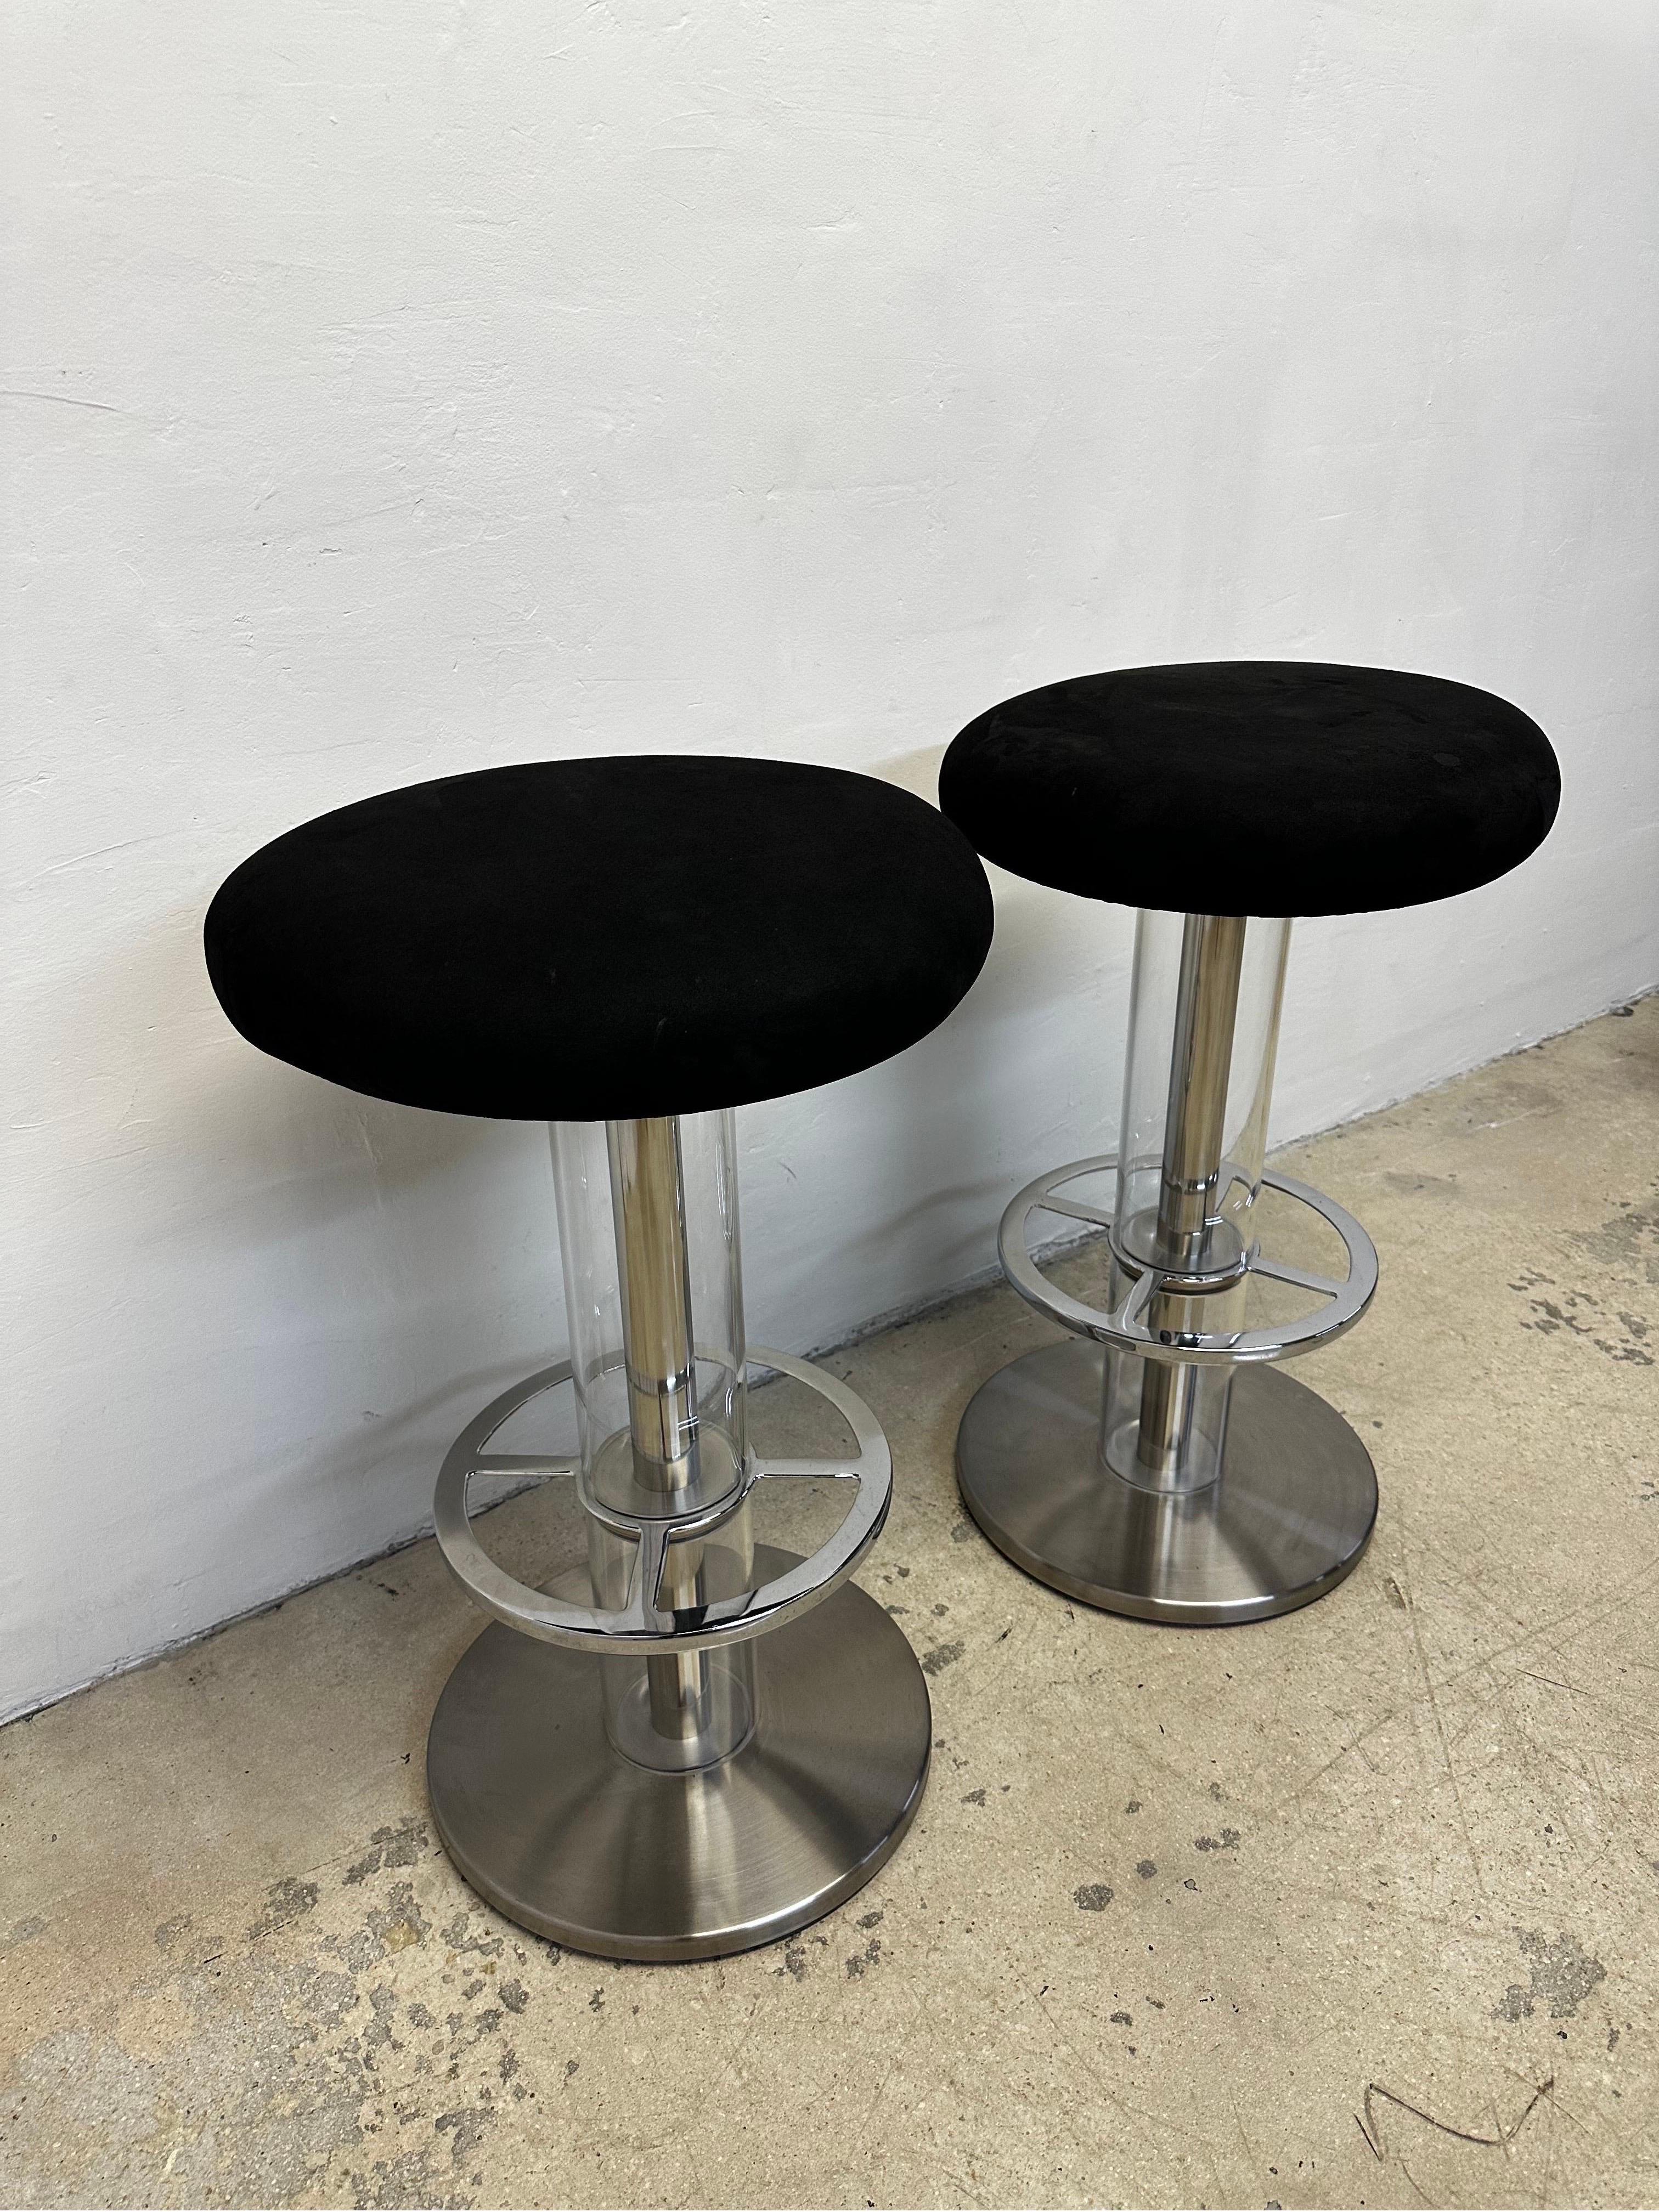 Pair of Design For Leisure bar stools with black ultra suede swivel seats supported by a steel frame base with clear acrylic tubes.  

Fabric shows stretching and wear.  New upholstery recommended.